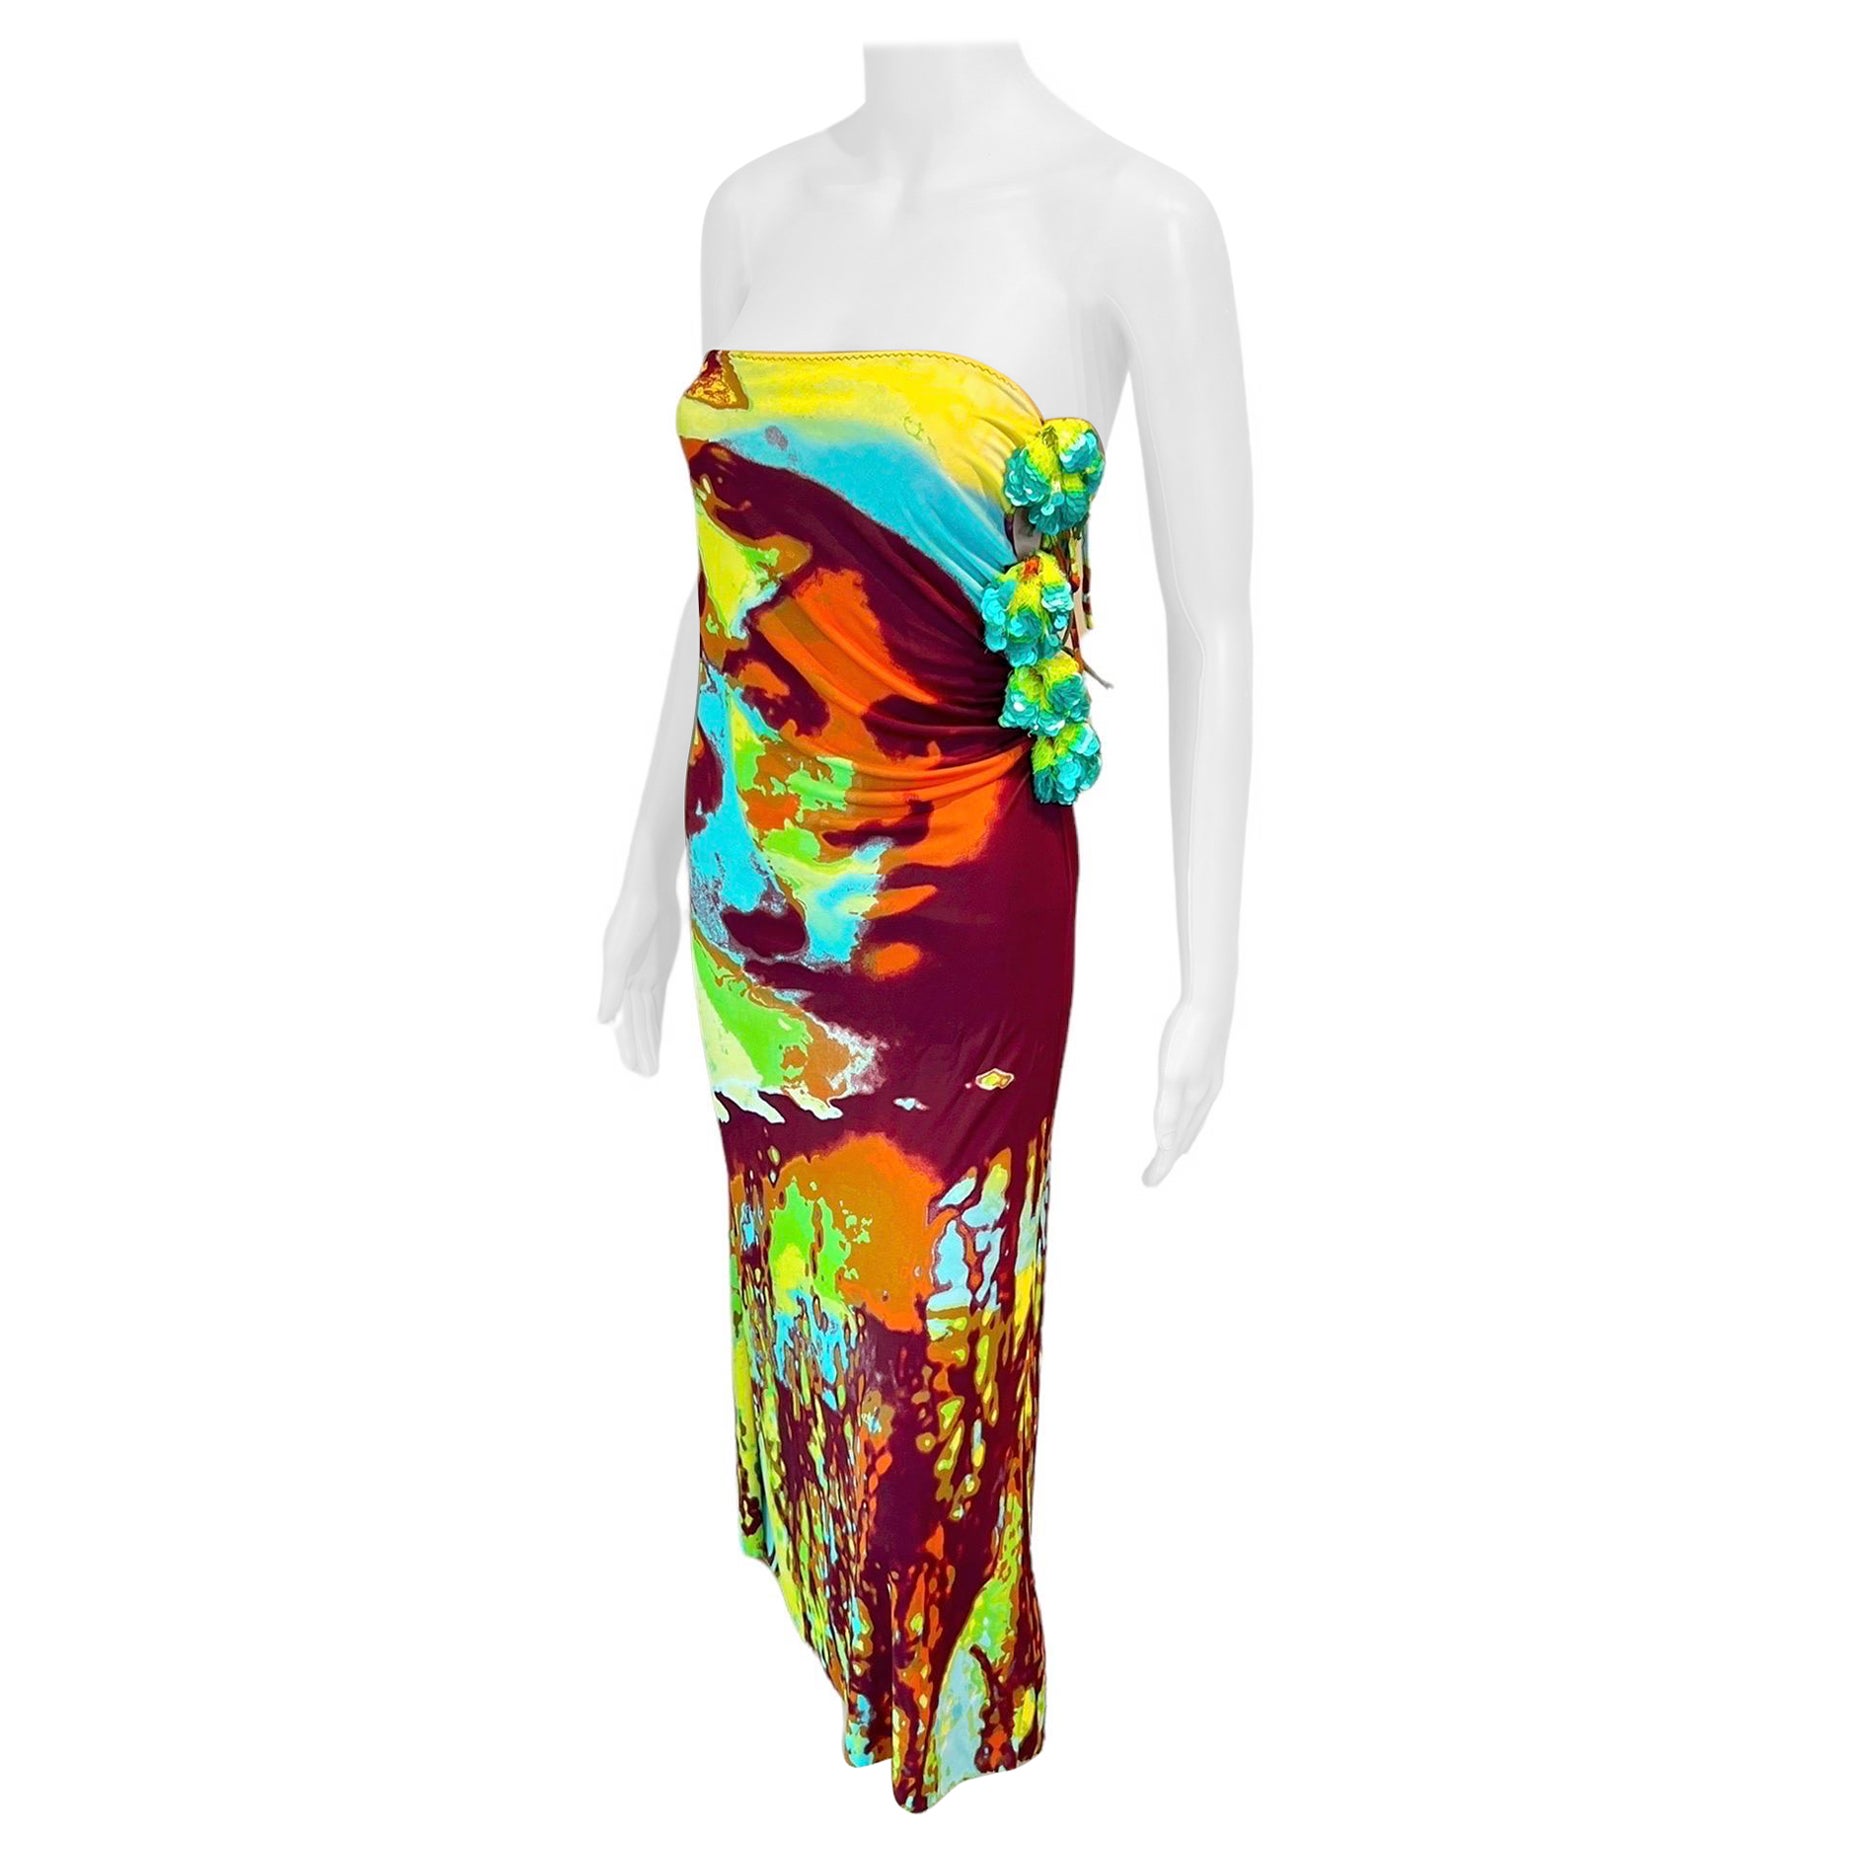 Jean Paul Gaultier S/S 2000 Embellished Psychedelic Print Maxi Skirt Dress 